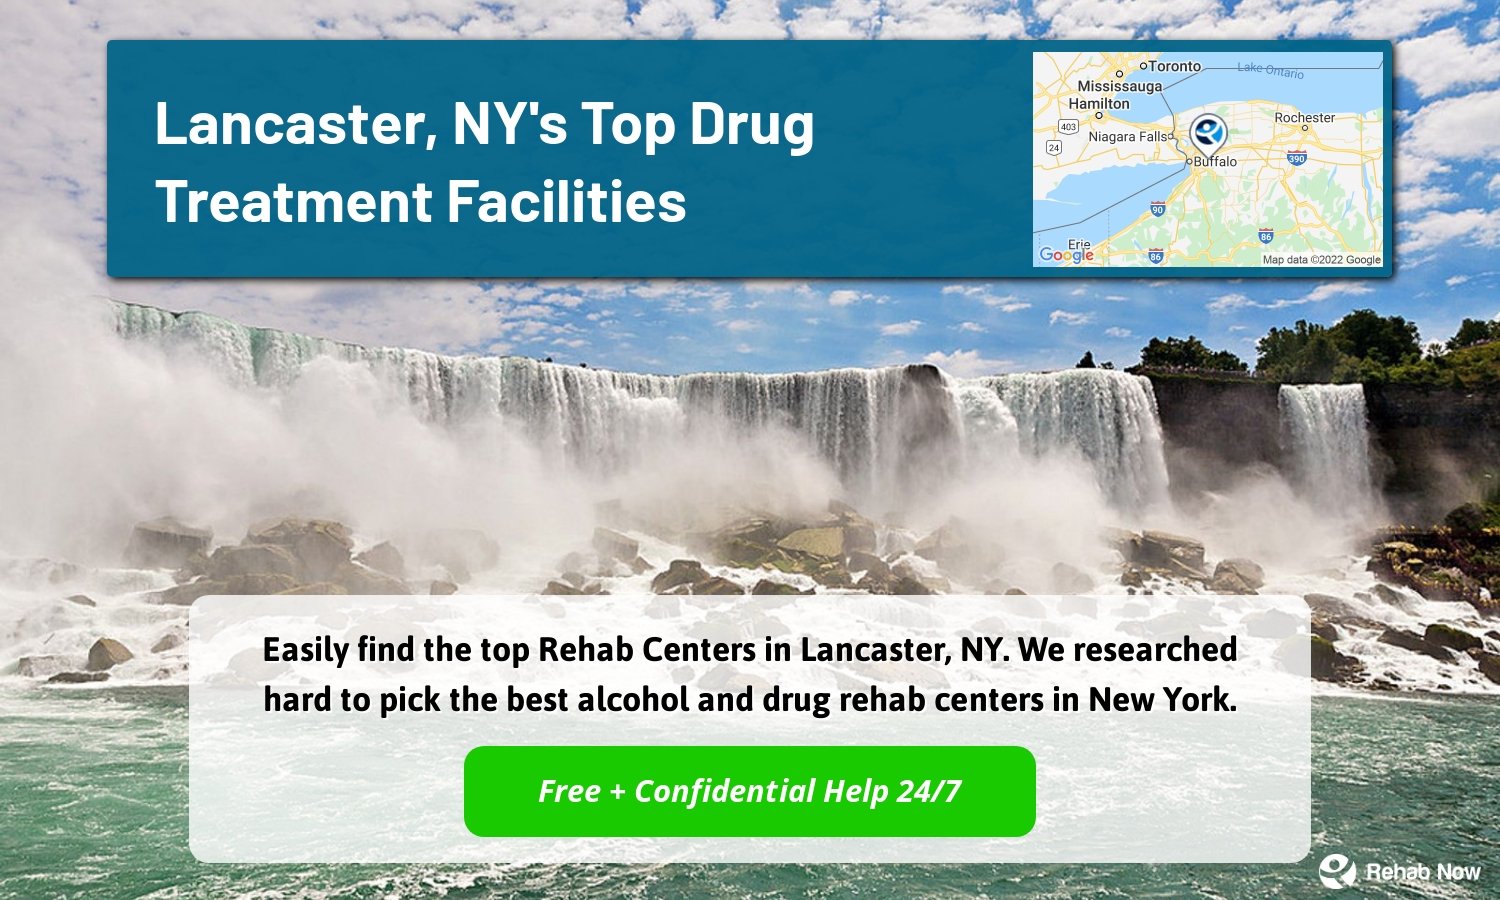 Easily find the top Rehab Centers in Lancaster, NY. We researched hard to pick the best alcohol and drug rehab centers in New York.